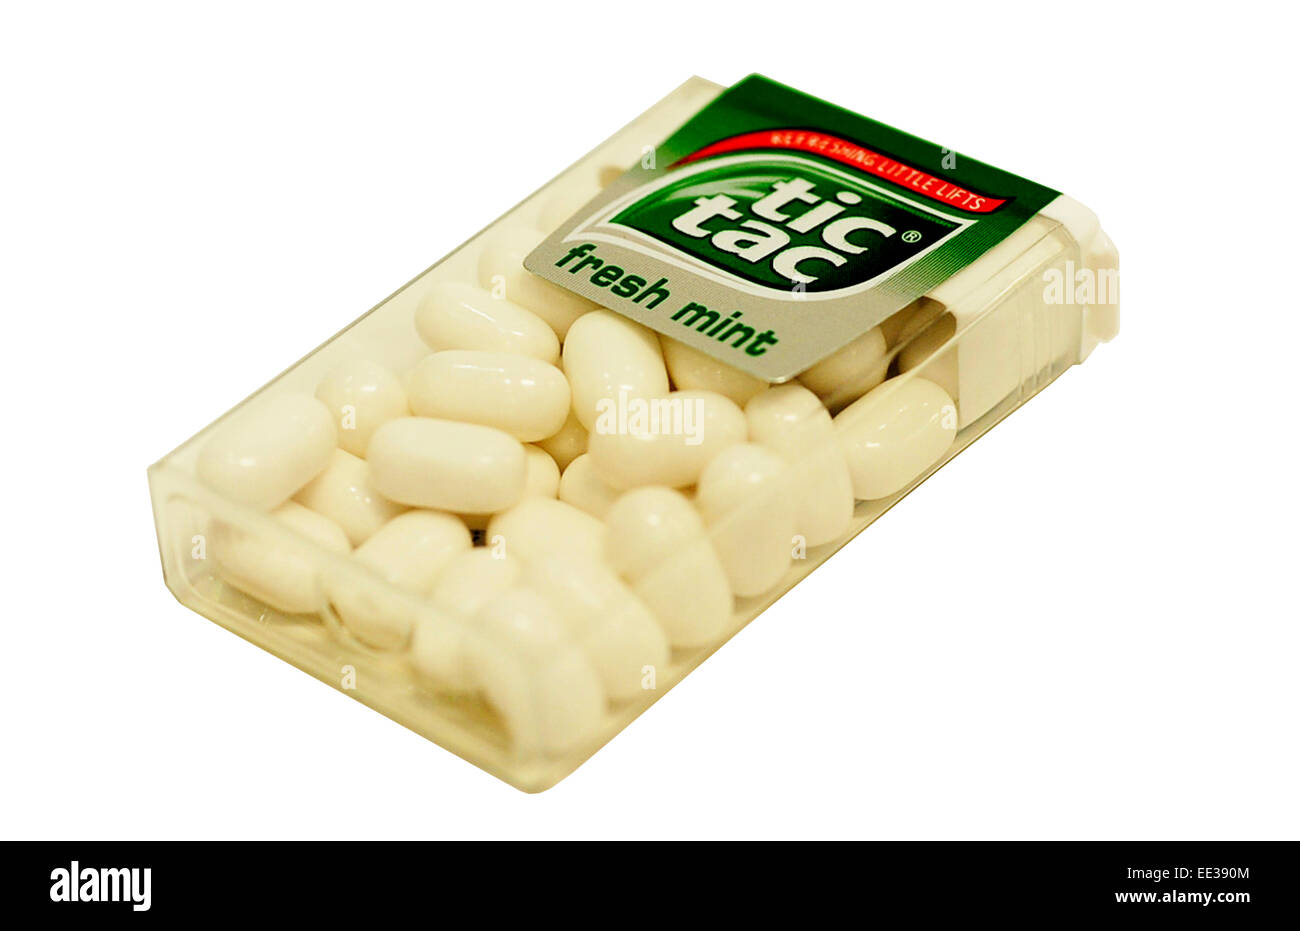 Close-up of a pack of Tic Tac mints Stock Photo